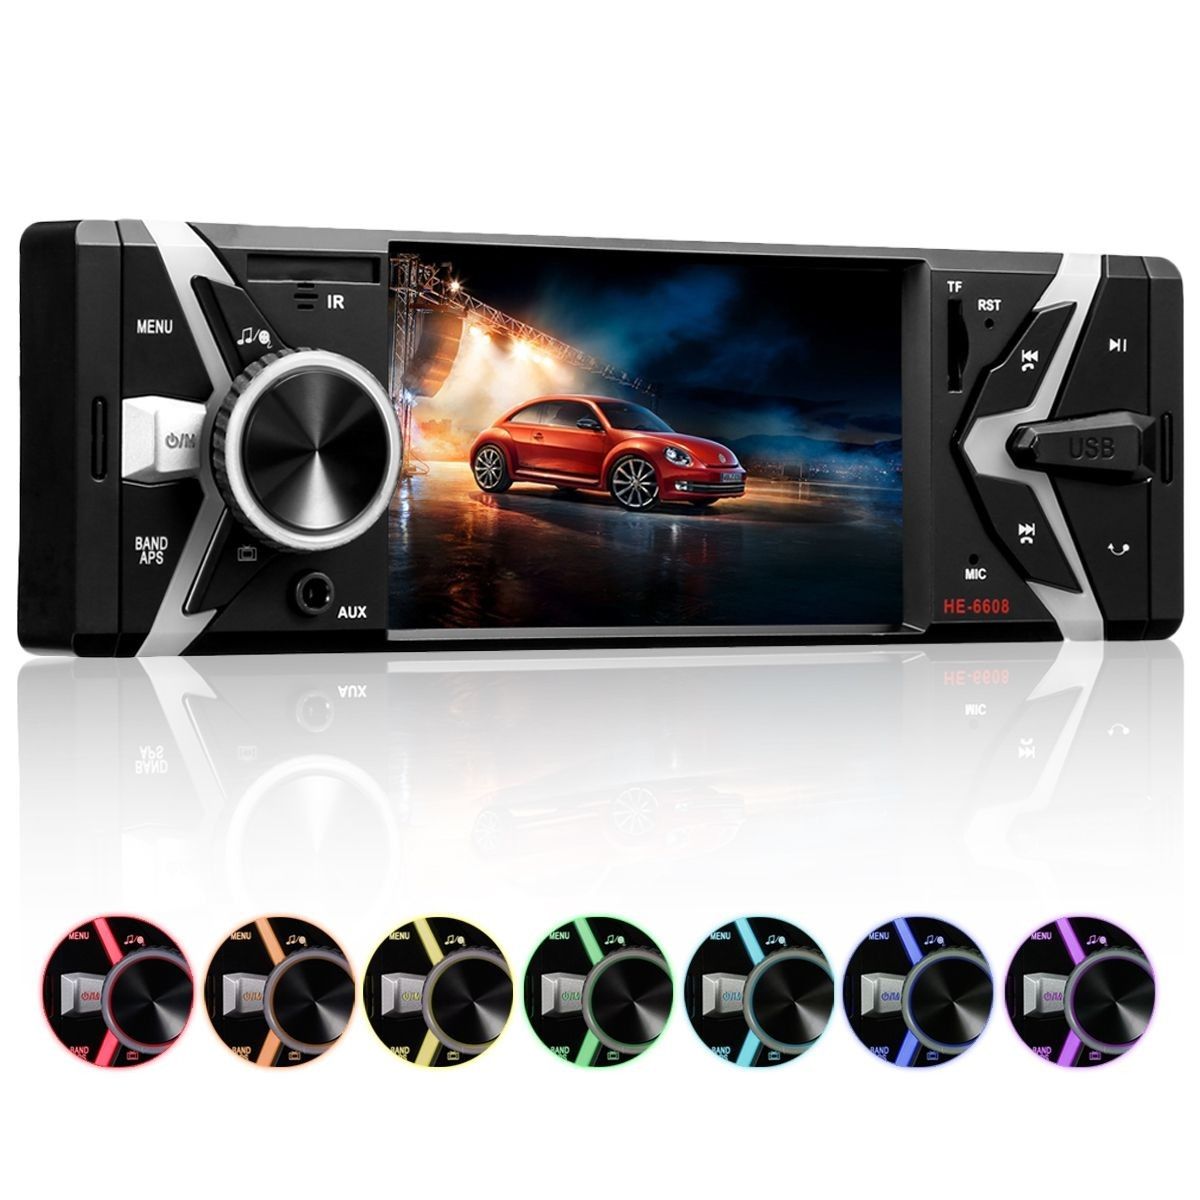 Excelvan HE-6608 4 Inch Stereo Car MP5 Player